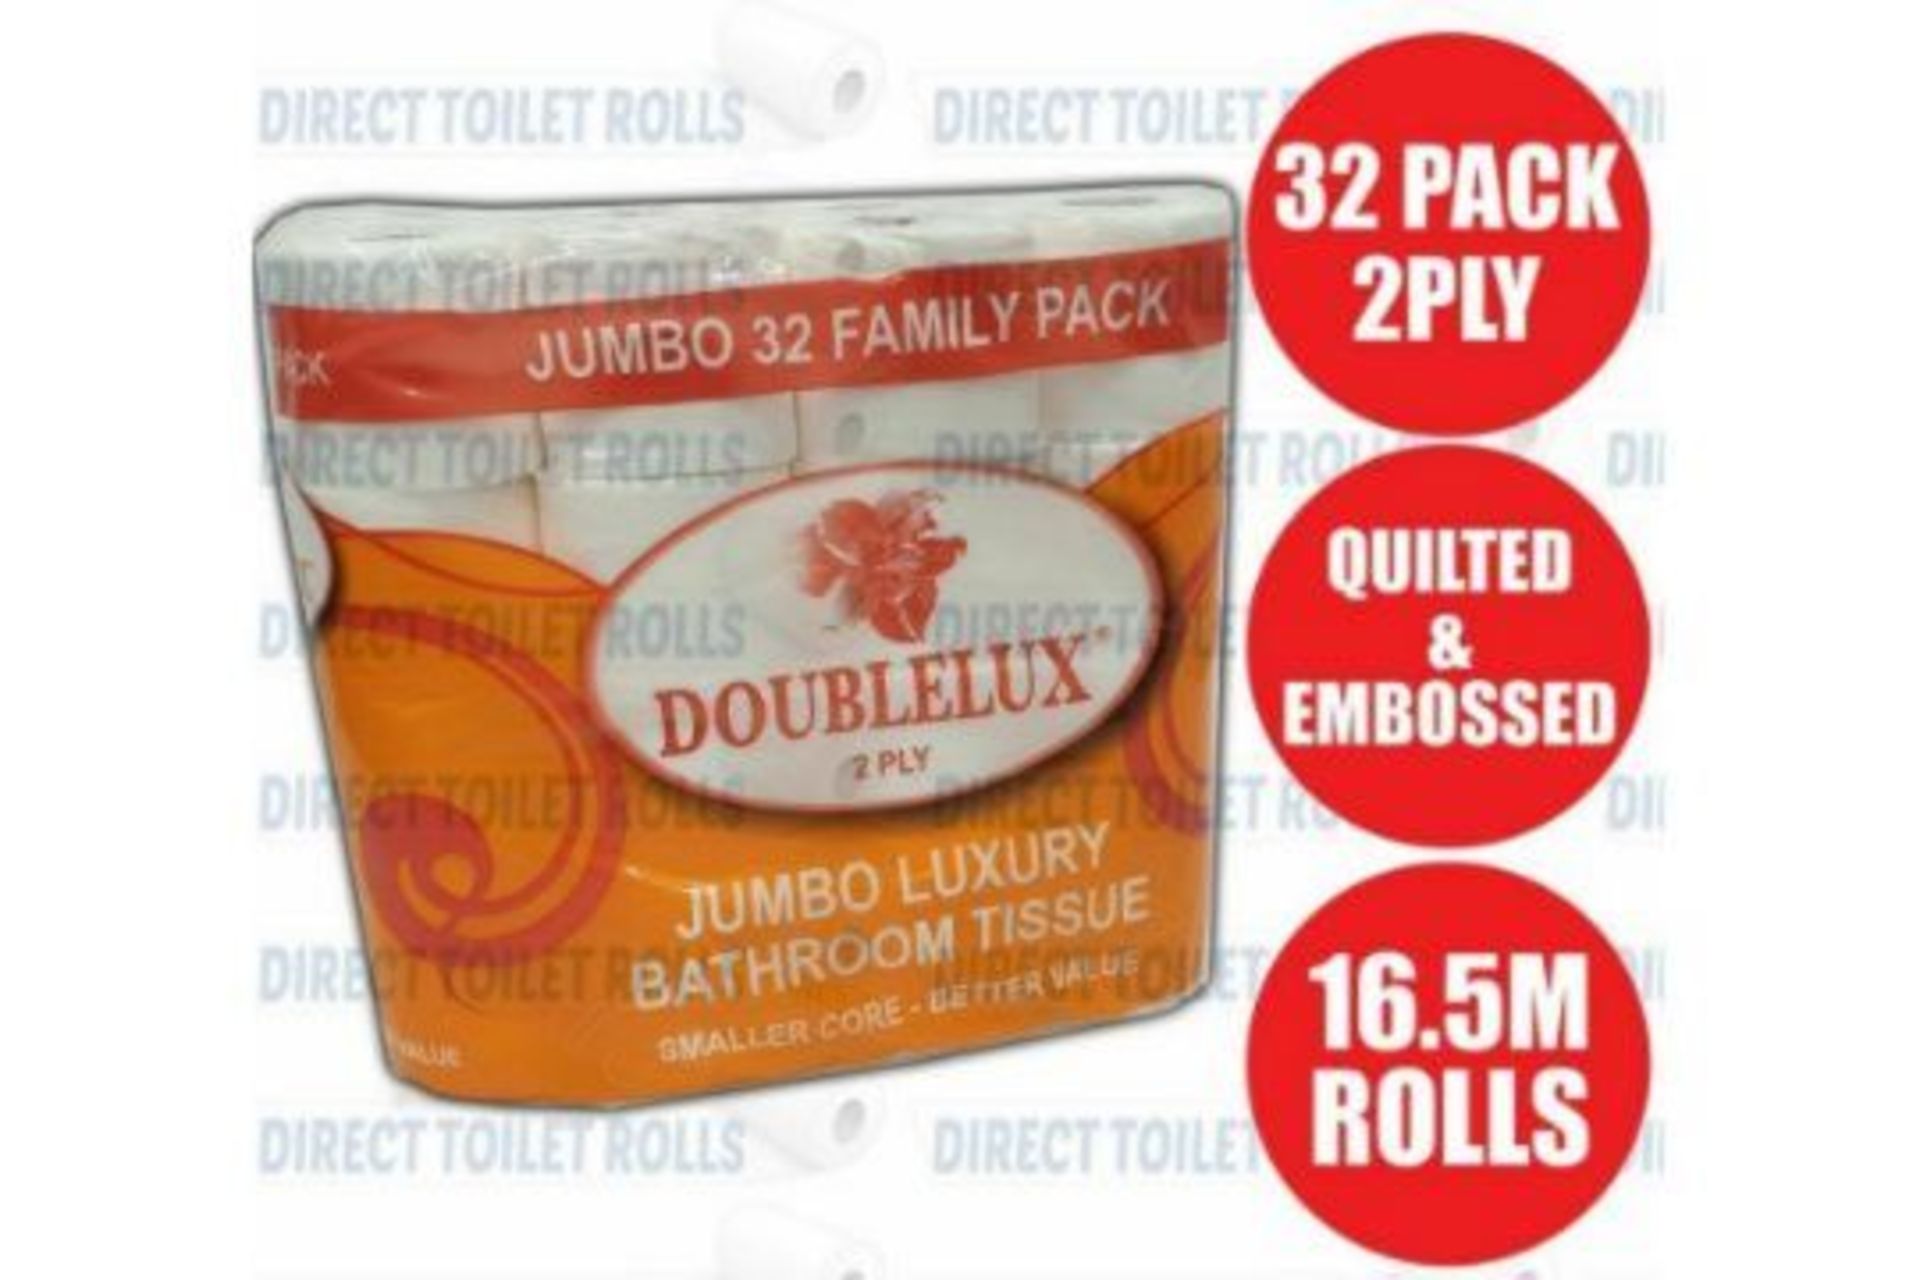 BRAND NEW 32 ROLL FAMILY PACK OF LUXURY 2 PLY TOILET PAPER